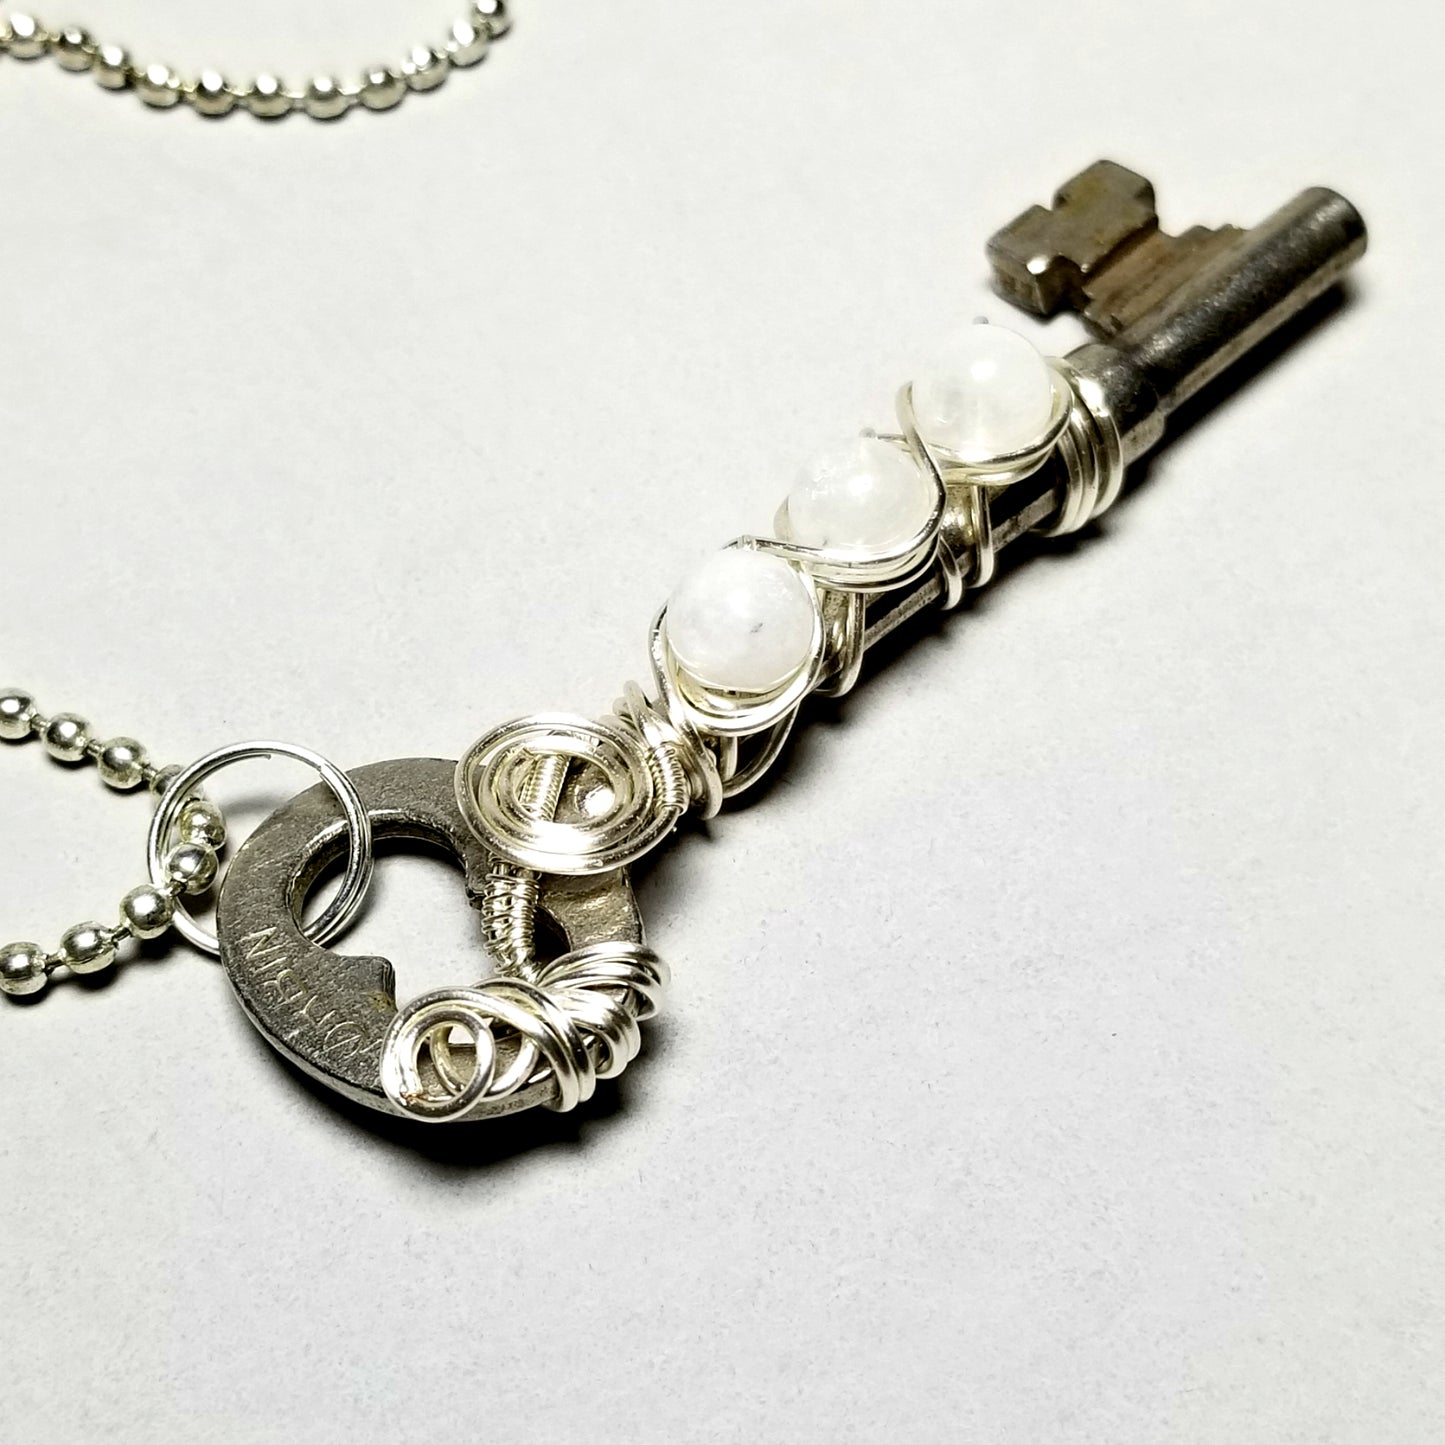 Wire Wrapped Key Necklace, Moonstone Jewelry Silver